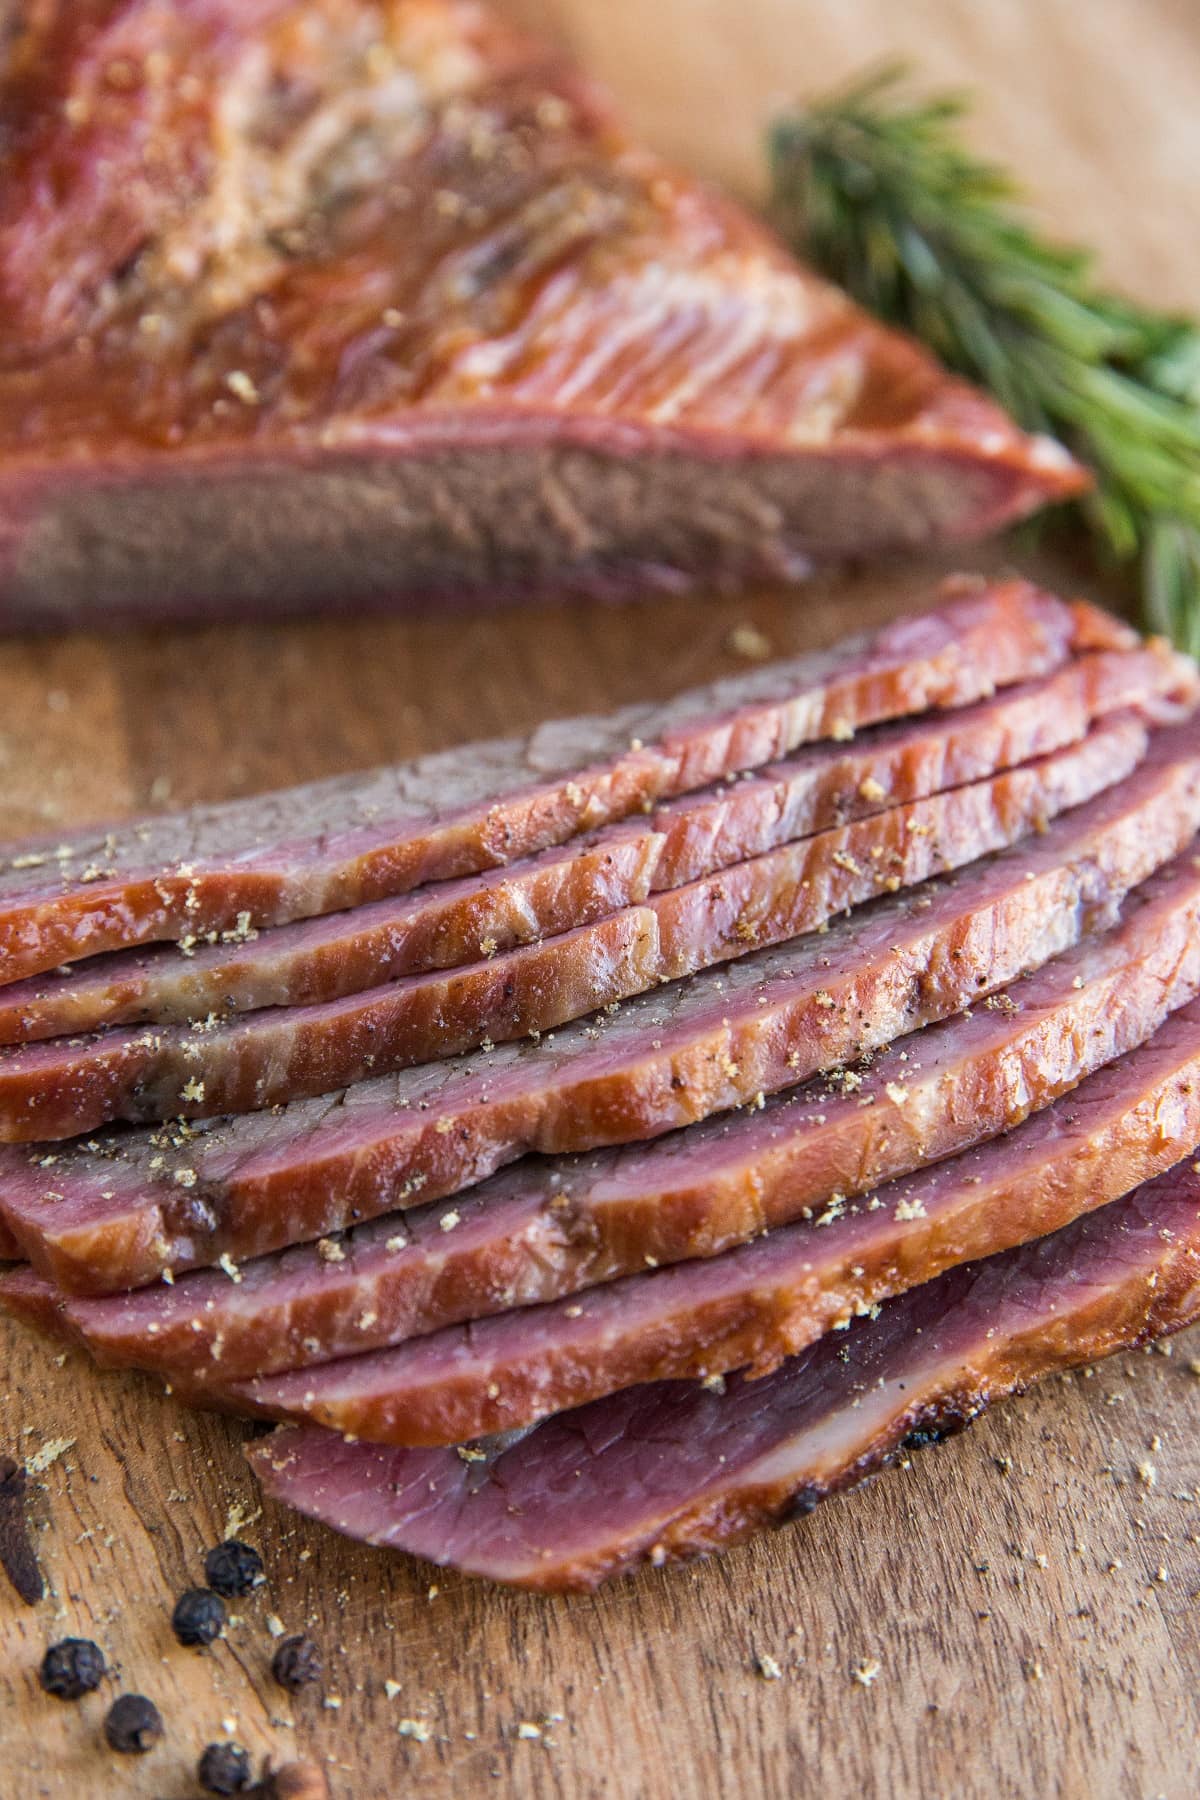 How to Make Homemade Pastrami - nitrate free, sugar-free and delicious! Better than store-bought pastrami.